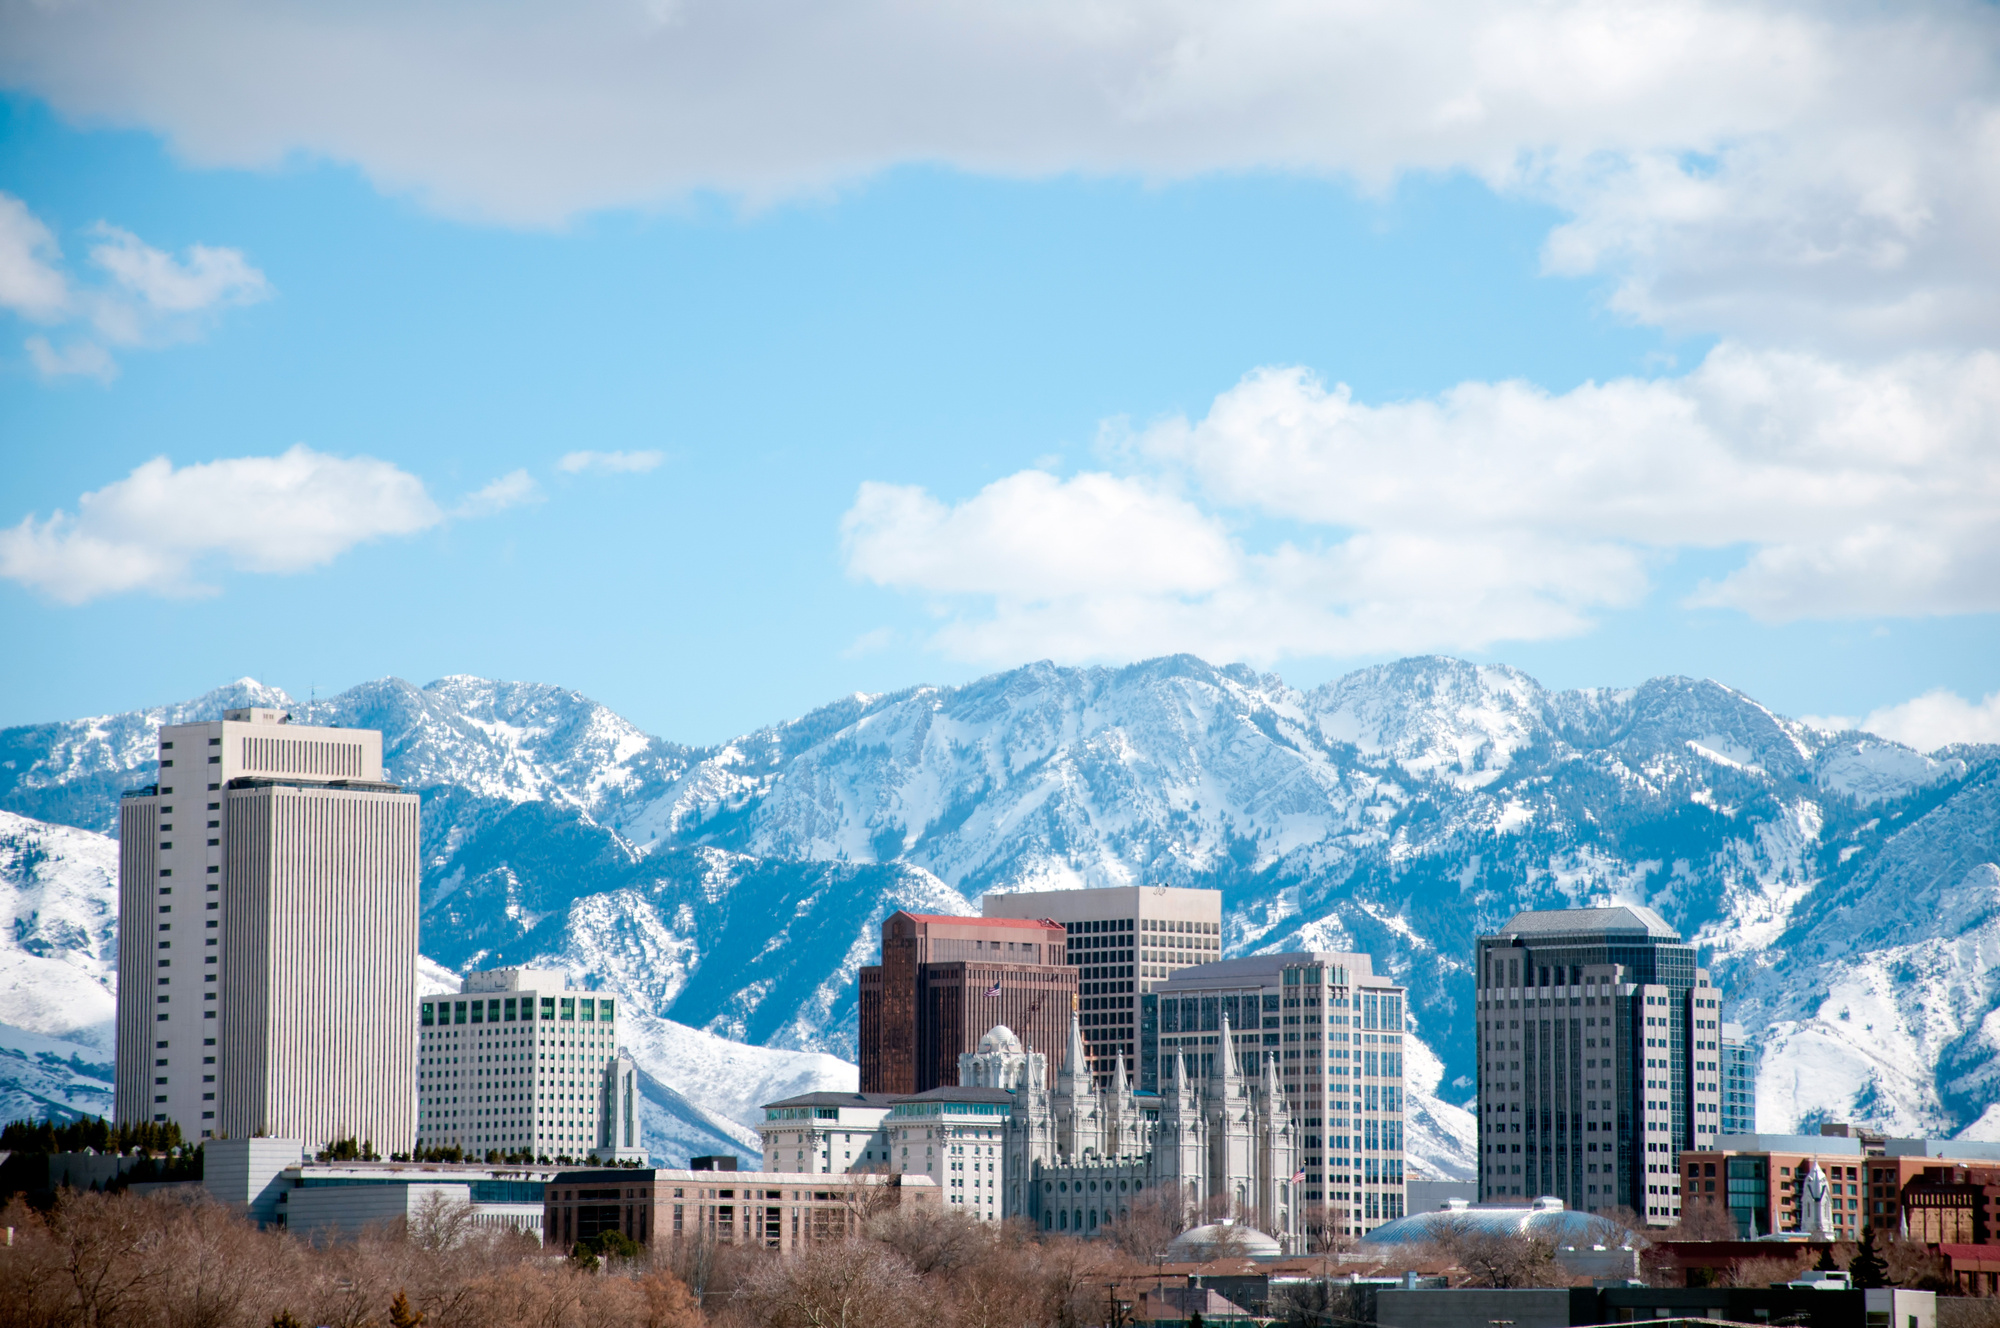 There are many amazing places and things to do in Utah. Learn whether moving to Utah is the right choice for you by checking out this guide.